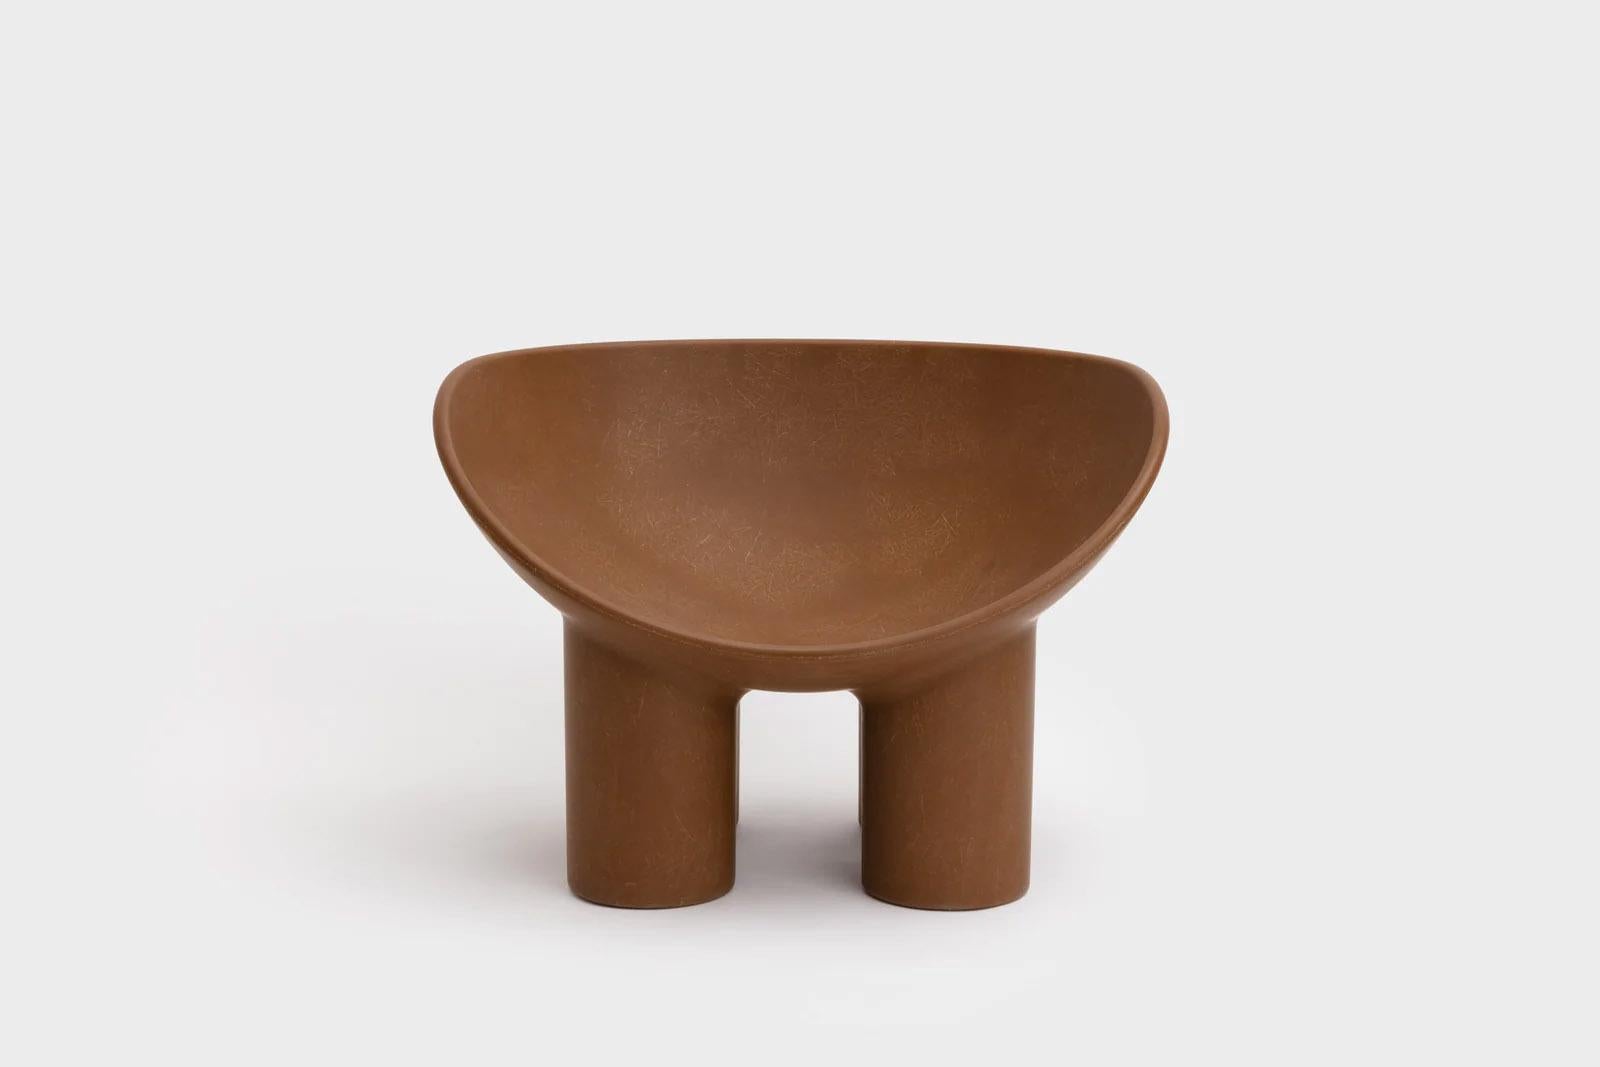 Contemporary fiberglass chair - Roly Poly chair by Faye Toogood. This is shown in the chestnut fiberglass finish. 
Design: Faye Toogood
Material: Fiberglass 
Available also in raw, cream or charcoal finish

The Roly Poly chair is the anchor piece of